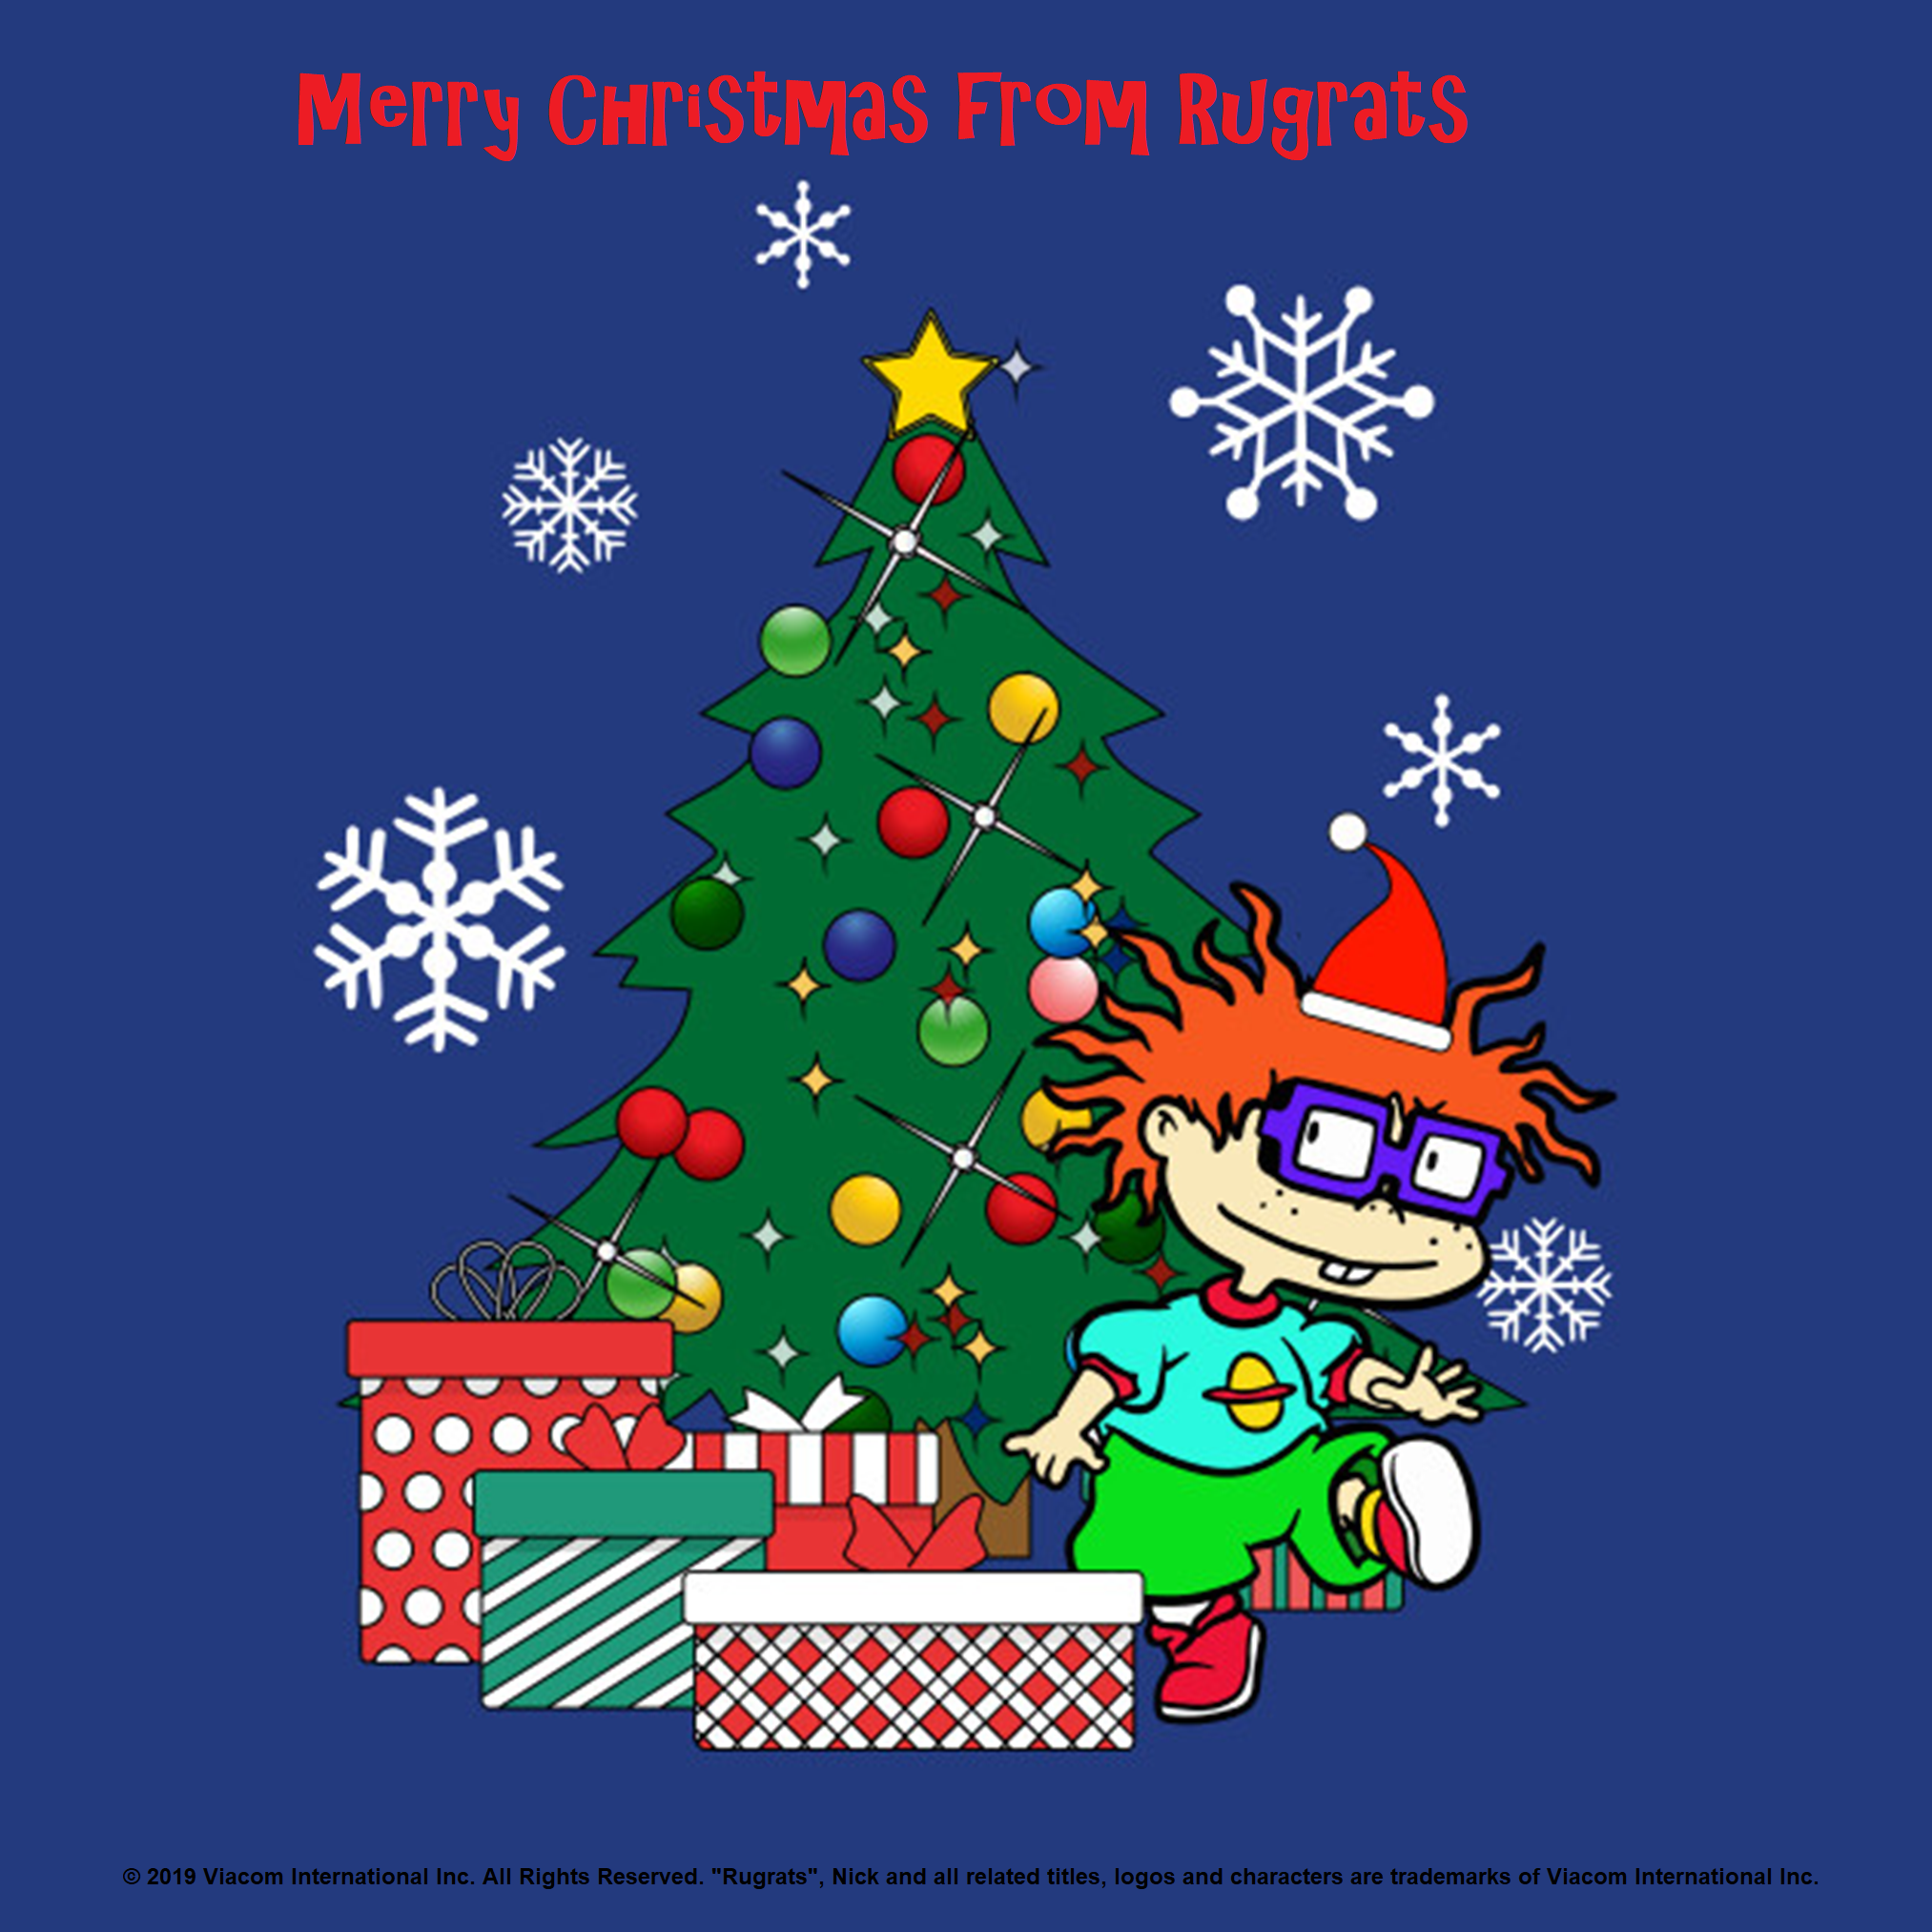 New Merry Christmas 2019 Wallpapers